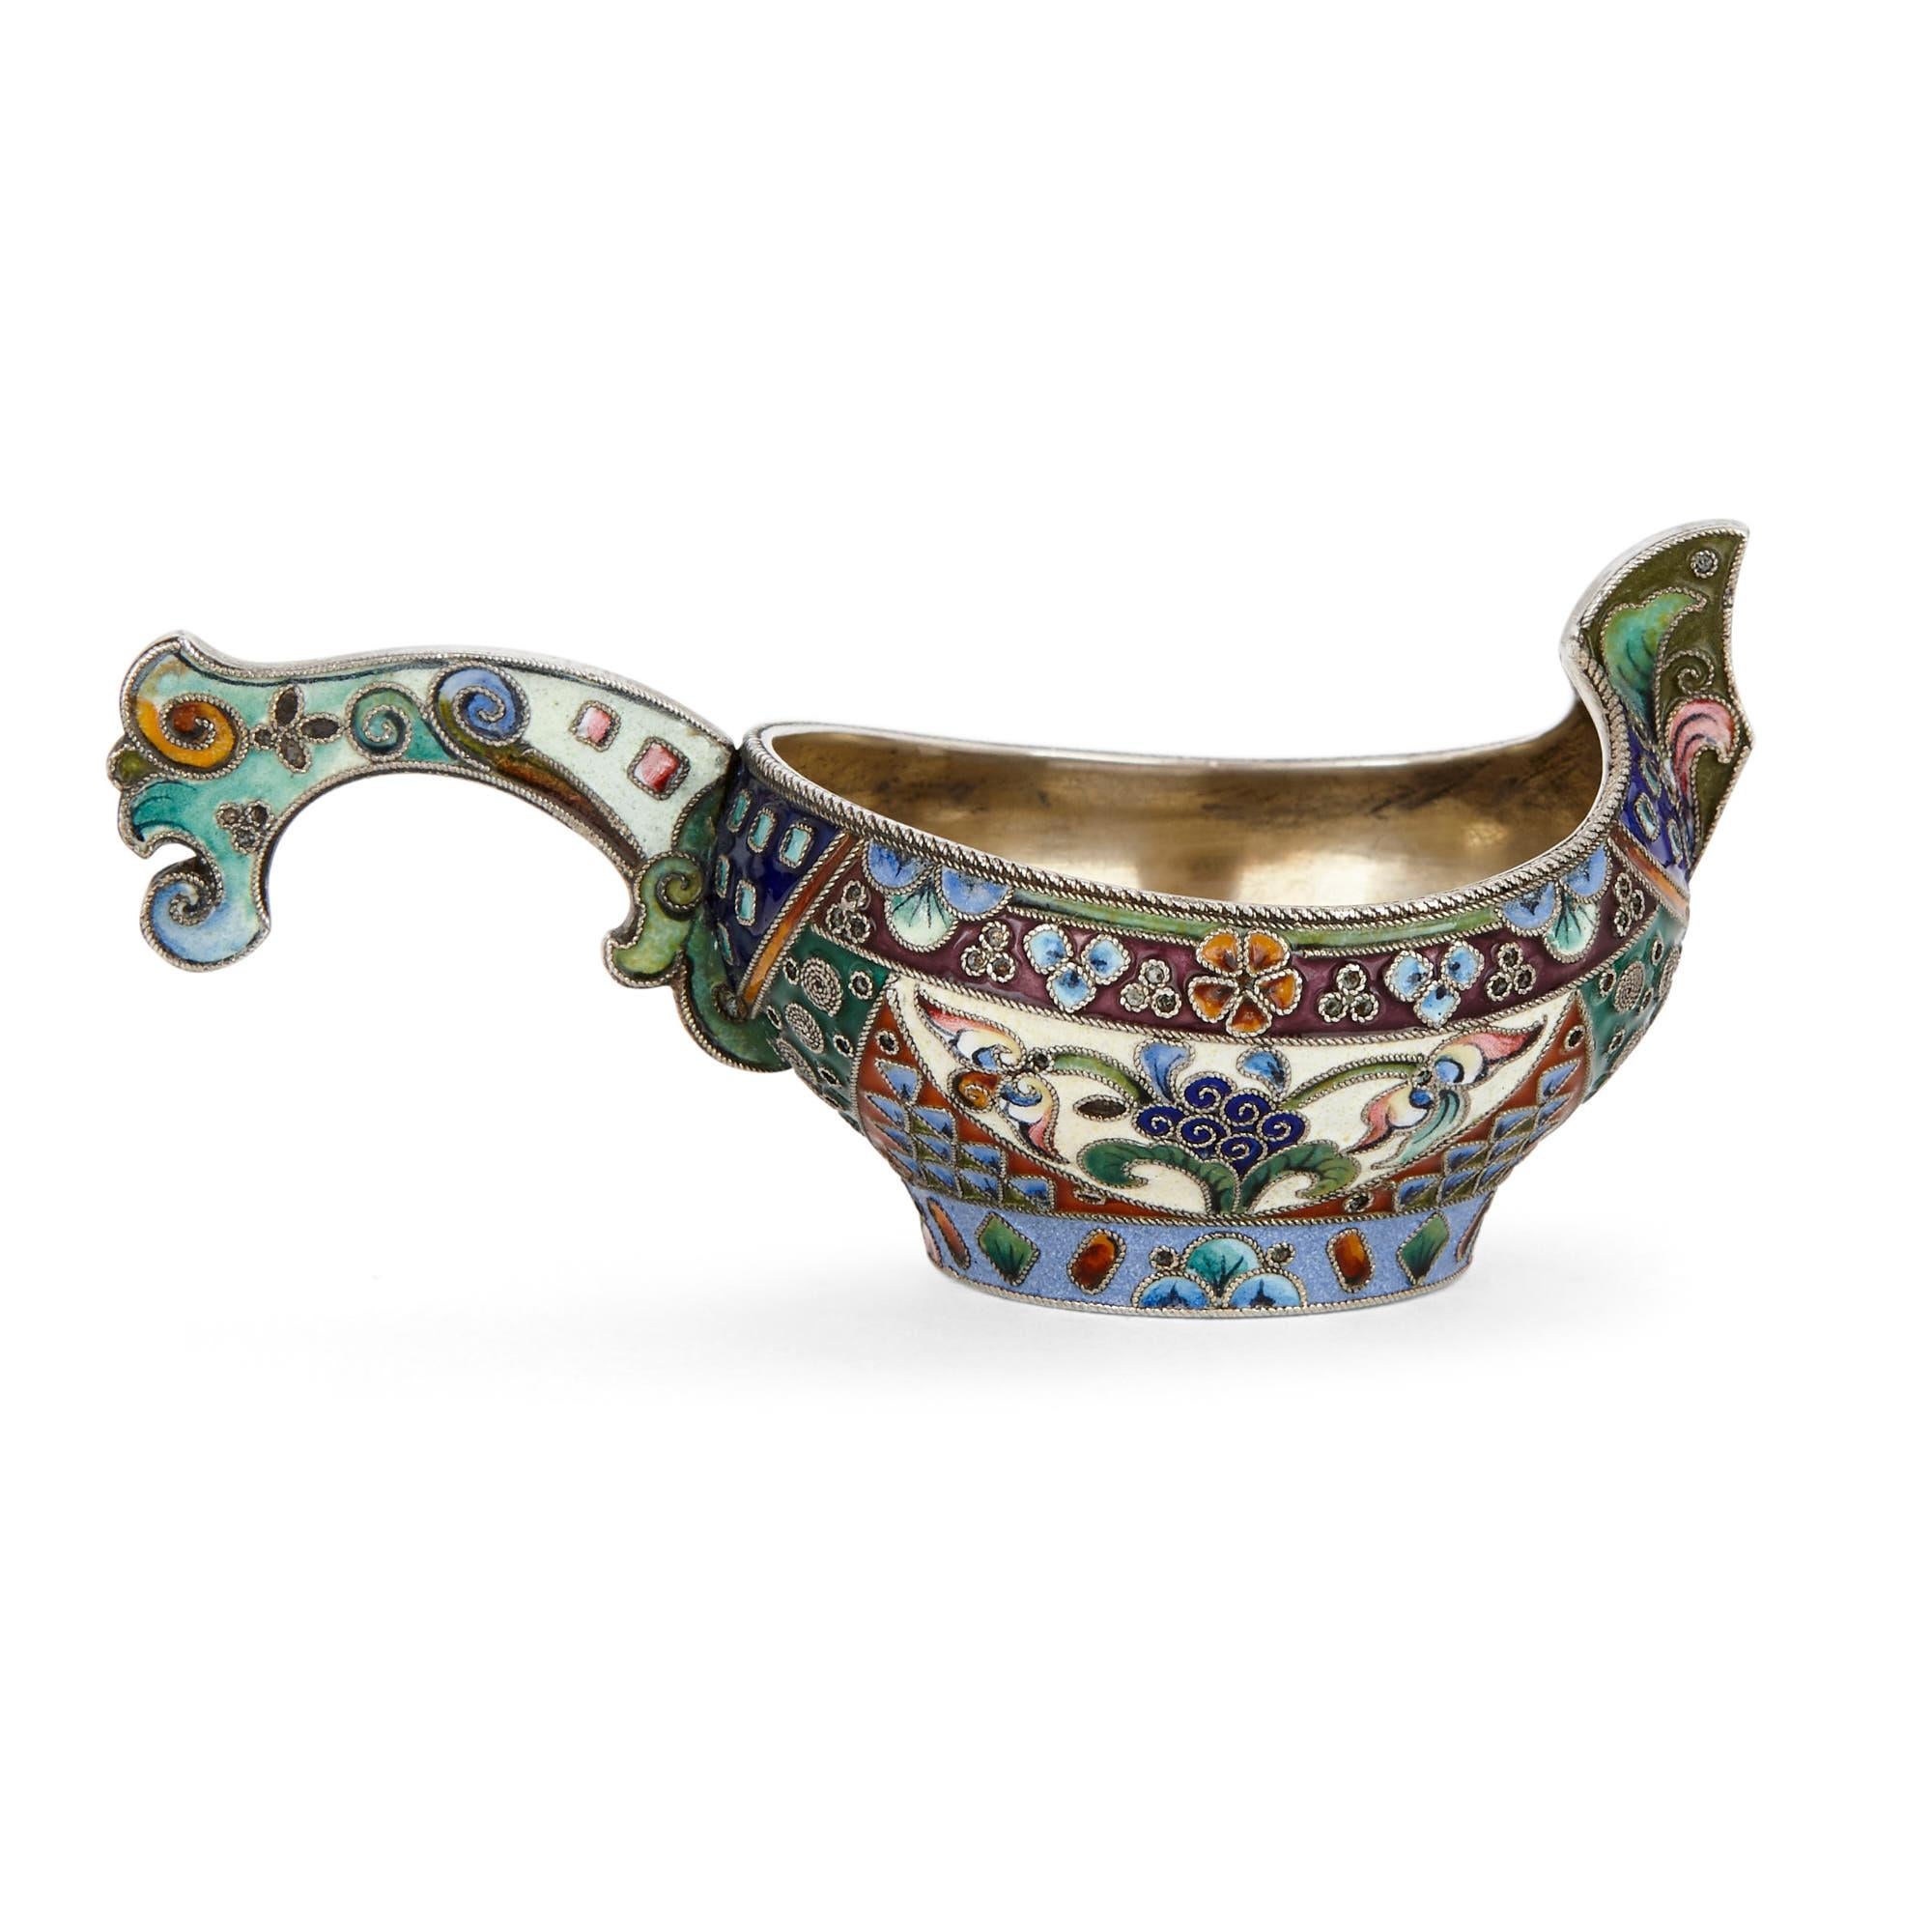 Originally a functional drinking vessel, a Kovsh is now largely a luxury ornament and a means by which a skilled artisan can demonstrate his or her craftsmanship. This is the case with this Kovsh, which was produced by the 26th Artel in Moscow in